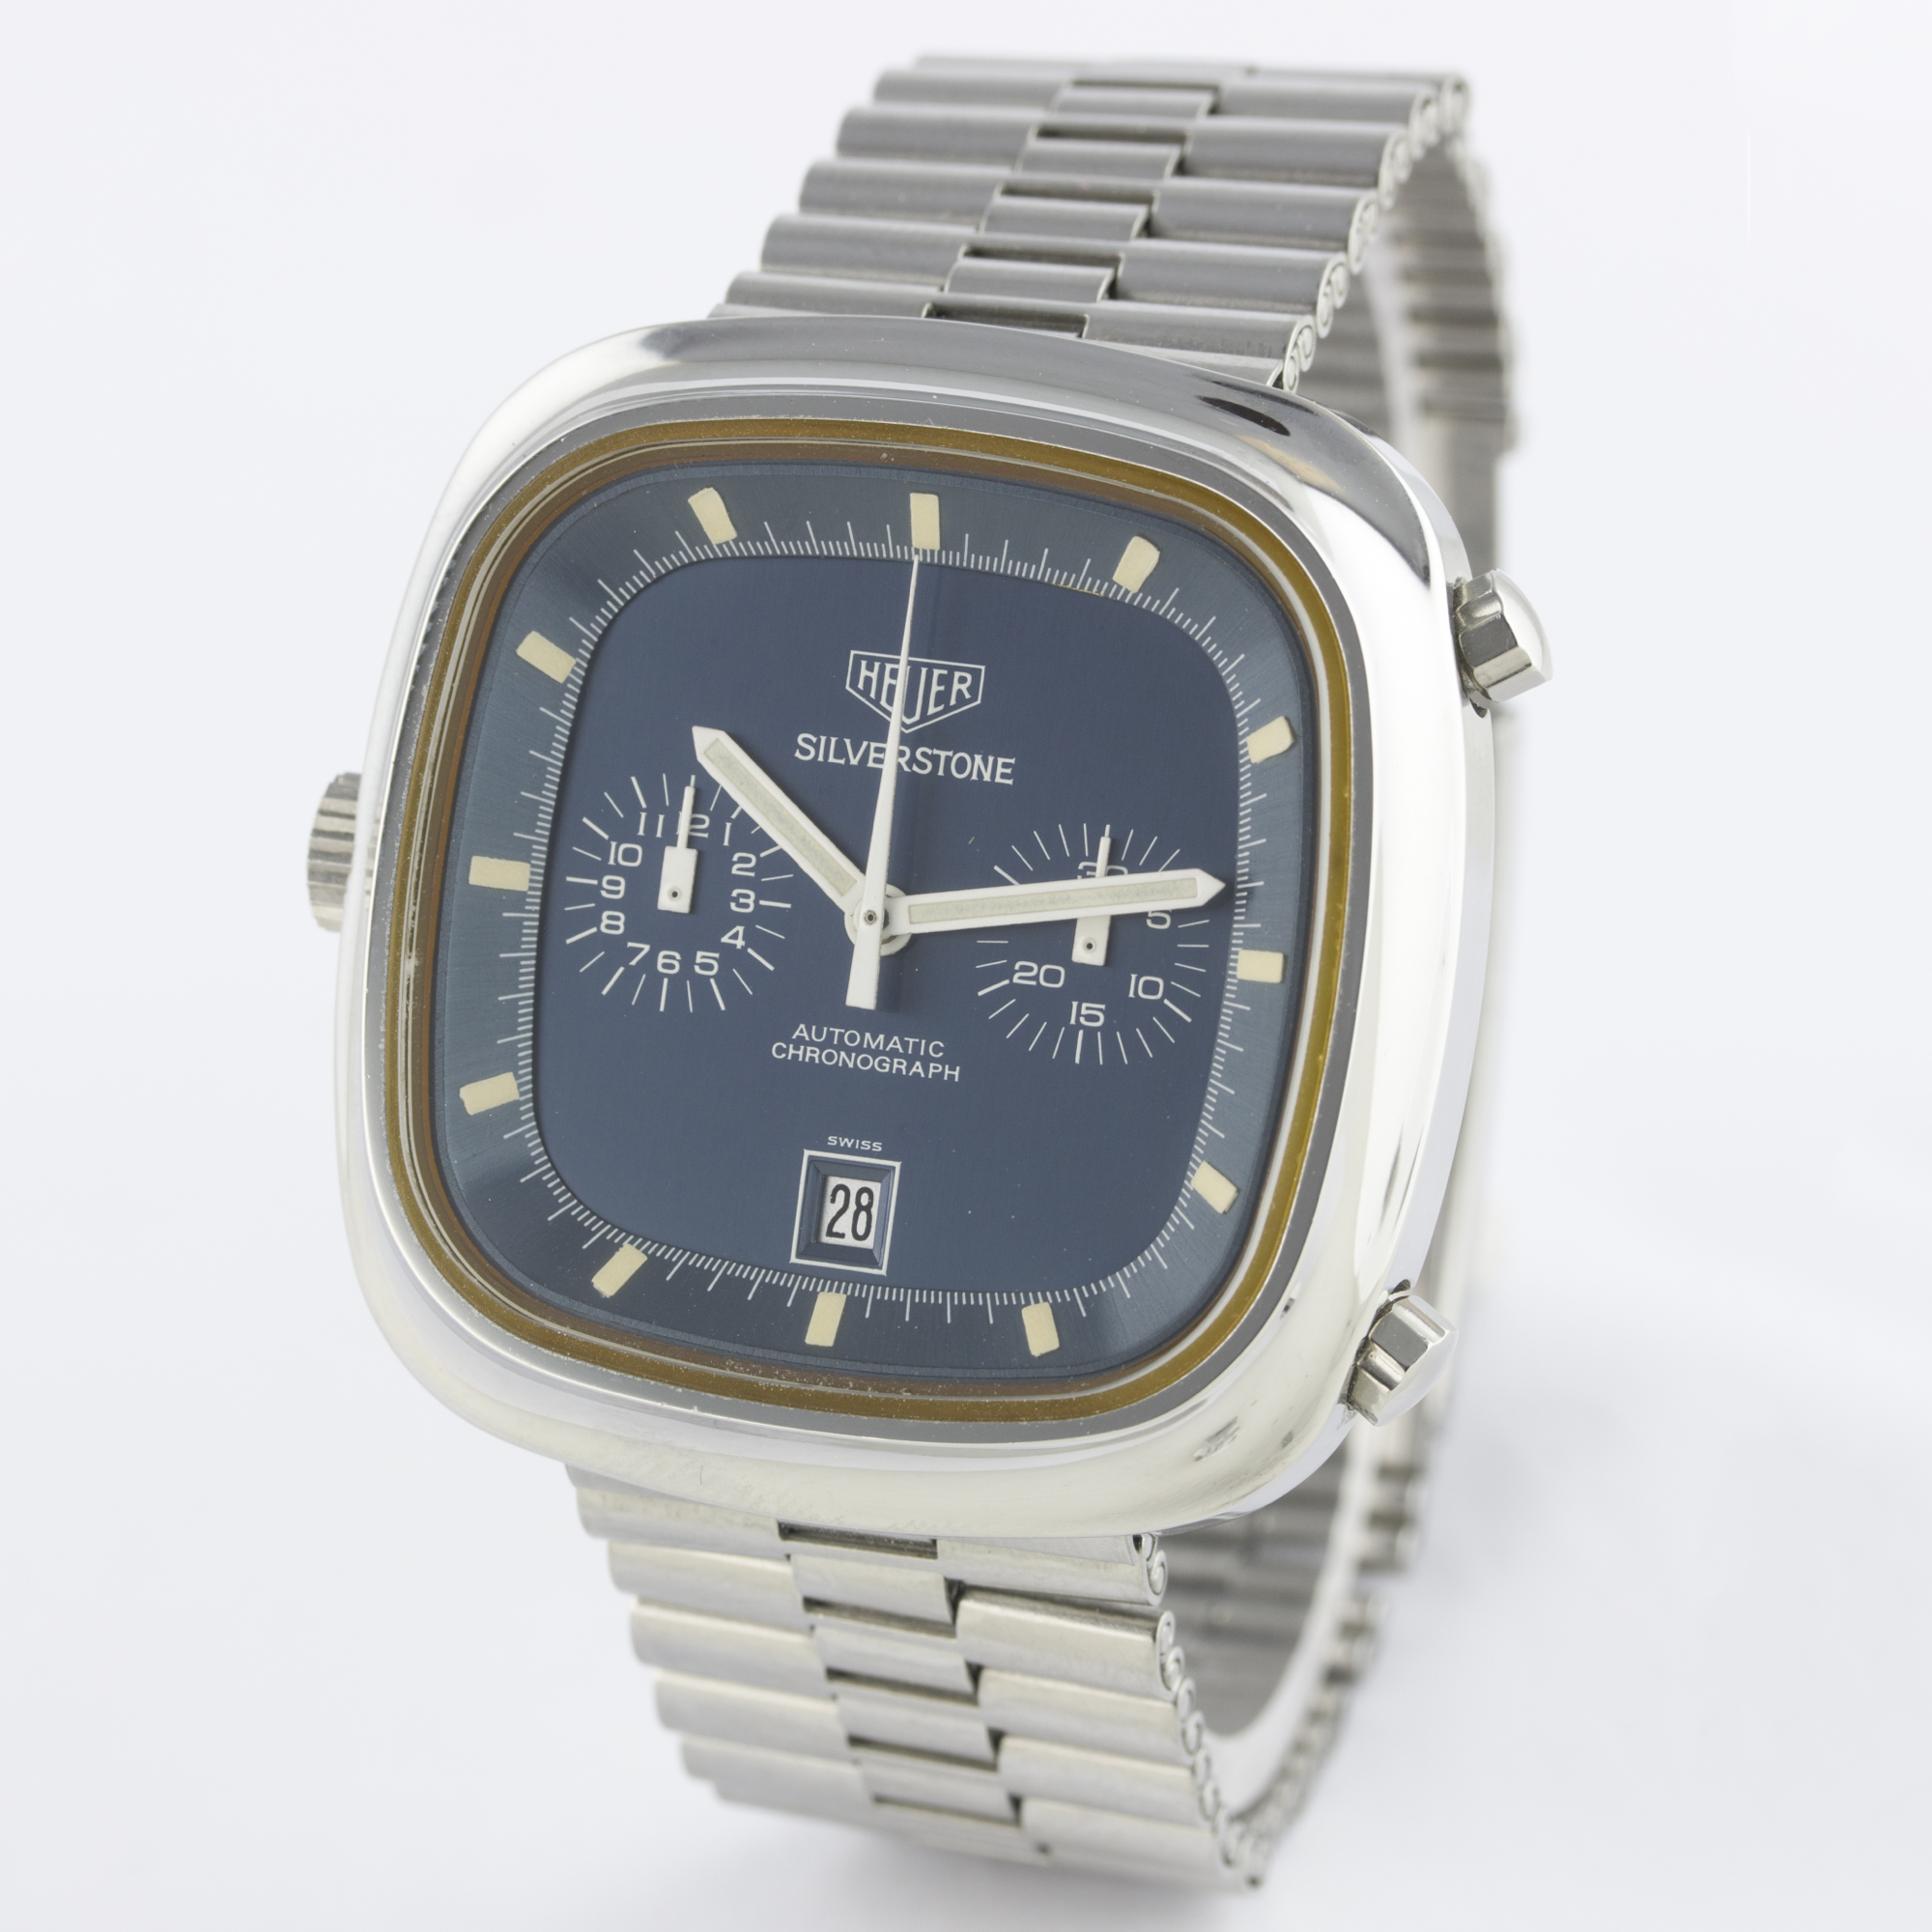 A RARE GENTLEMAN'S STAINLESS STEEL HEUER SILVERSTONE AUTOMATIC CHRONOGRAPH BRACELET WATCH CIRCA - Image 5 of 12